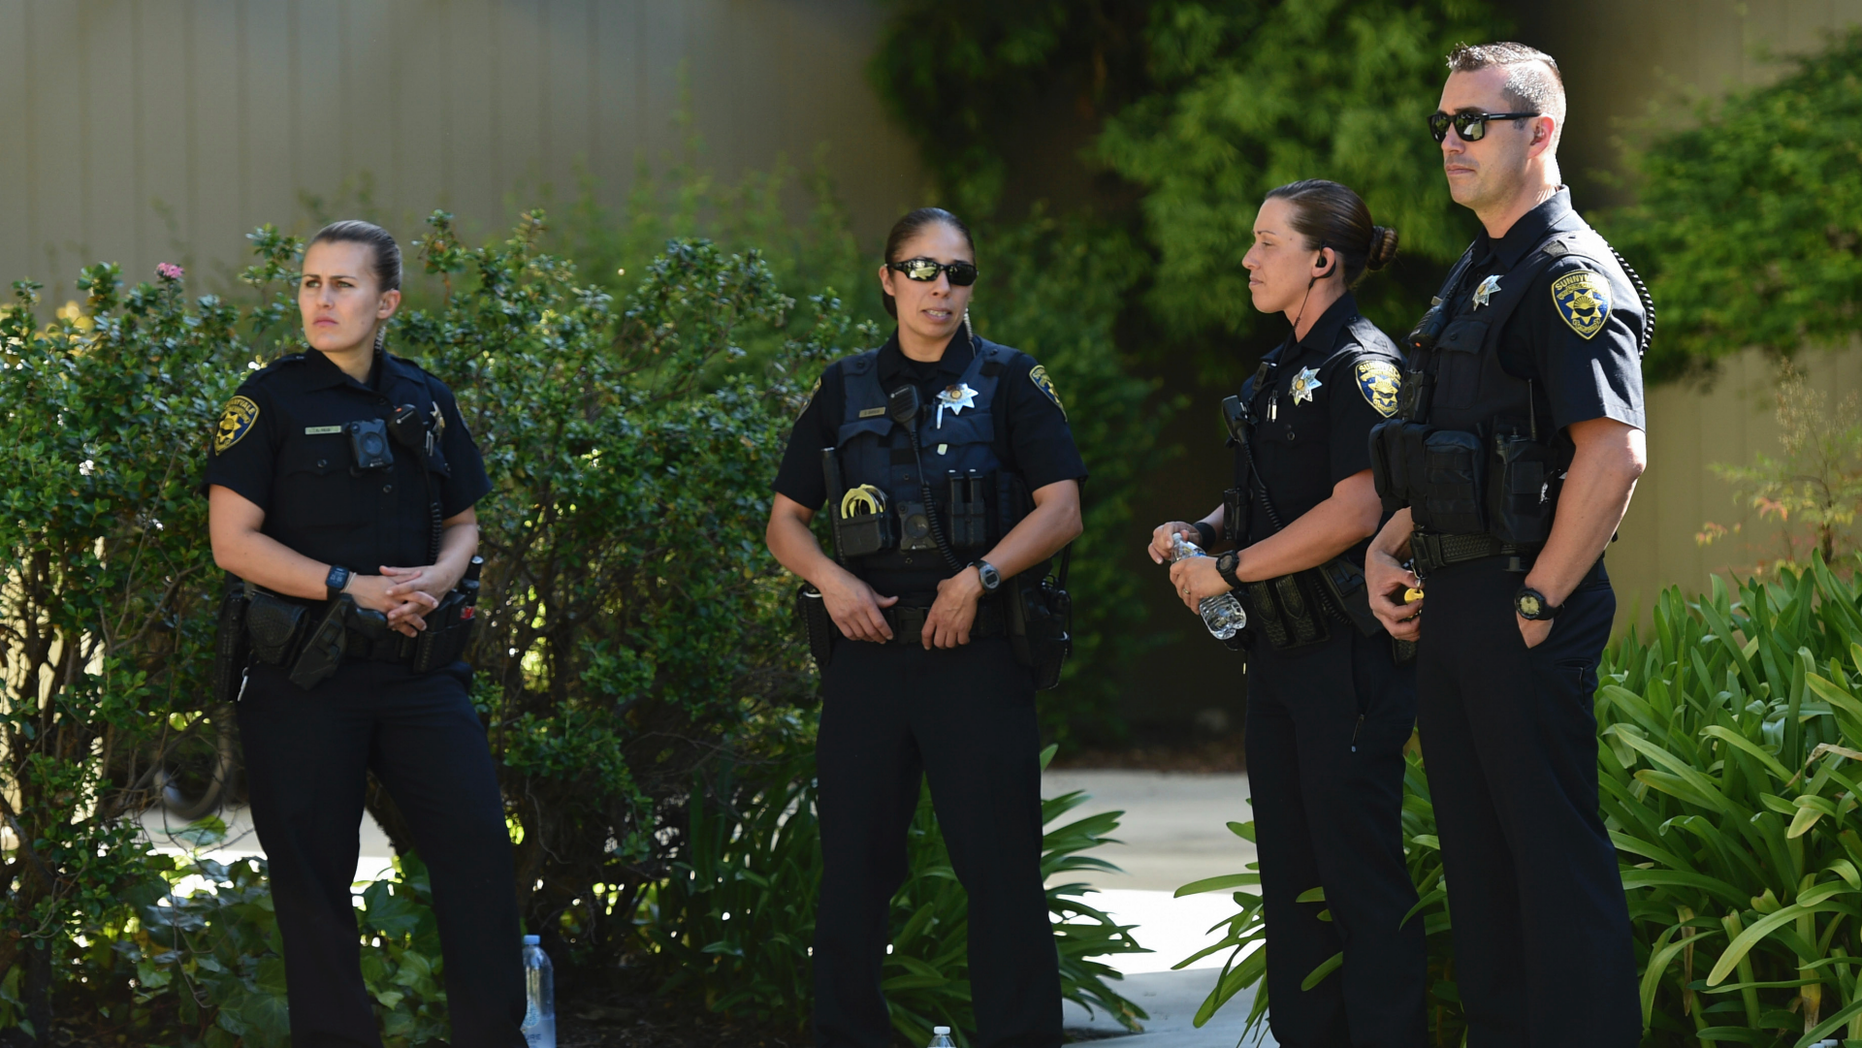 Police stand in front of an apartment complex suspected of being involved in a car accident in Sunnyvale, California on Wednesday, April 24, 2019. Investigators seek to determine the cause of the accident in Northern California, which injured several pedestrians on Tuesday night. Authorities said the driver of the car was arrested after apparently entering the group deliberately. (AP Photo / Cody Glenn)